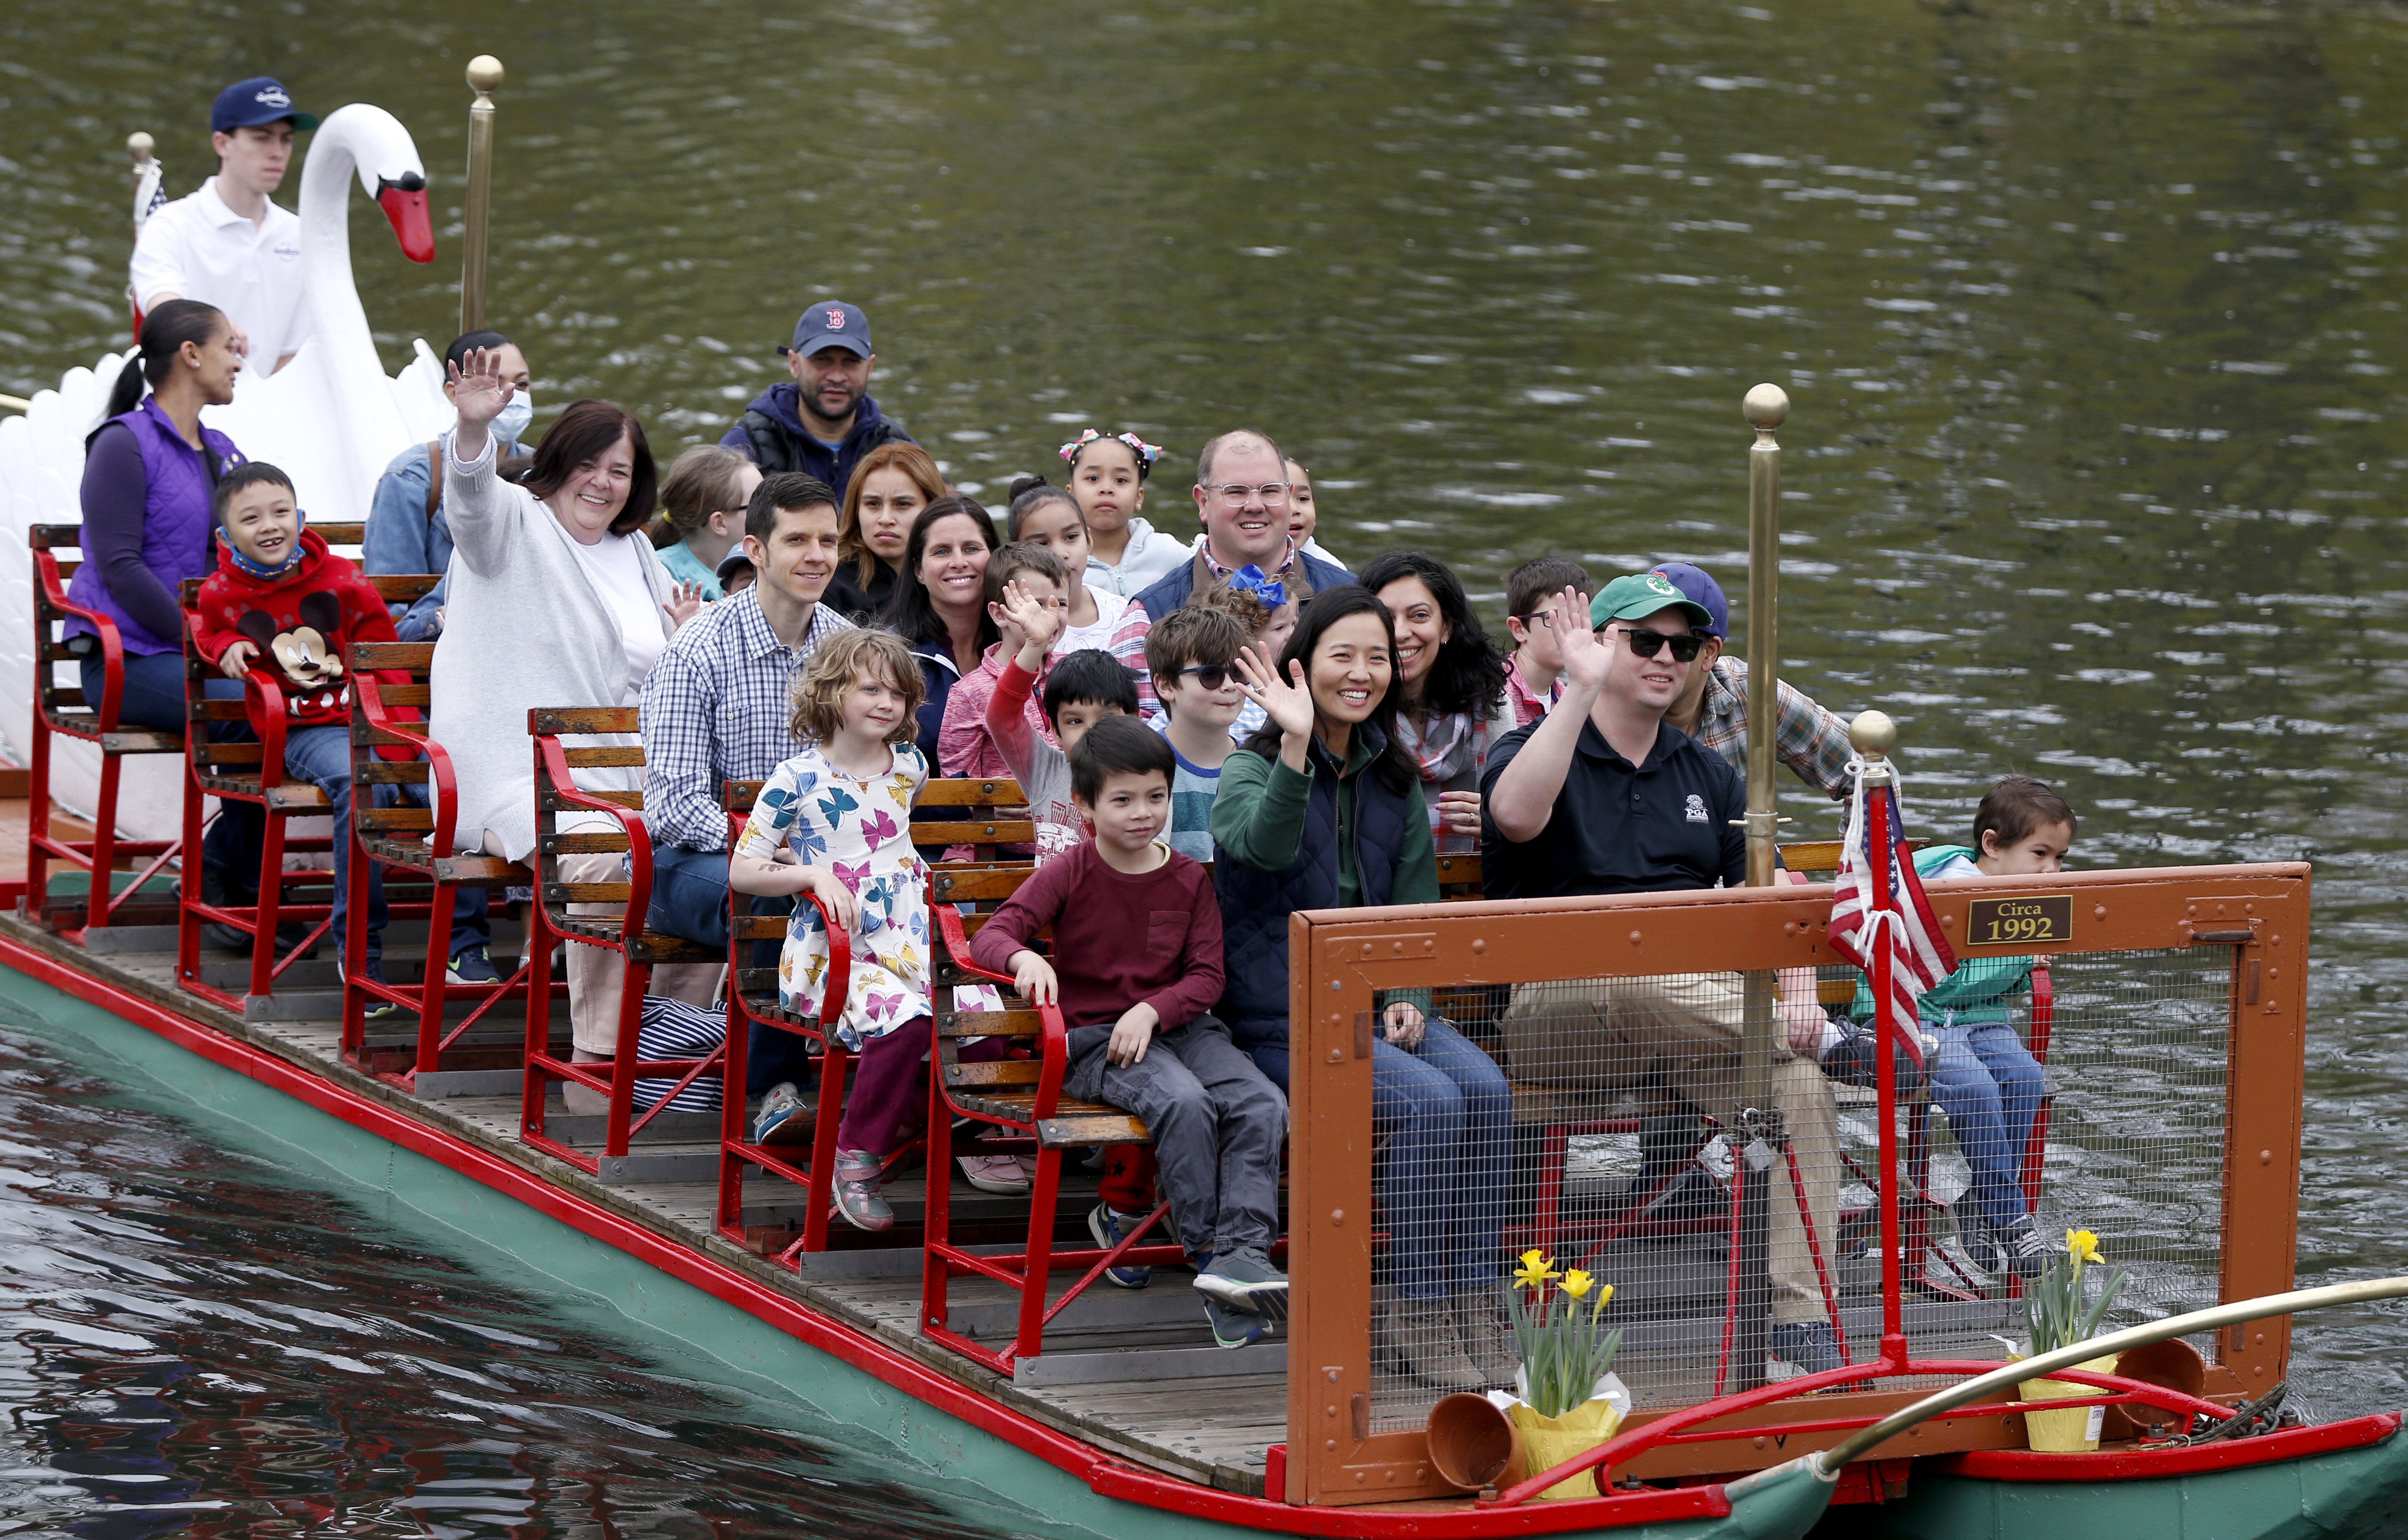 Boston Mayor Michelle Wu and her family are pictured riding the popular Boston Swan Boats as they open on April 16, 2022, at the Boston Public Garden lagoon | Source: Getty Images